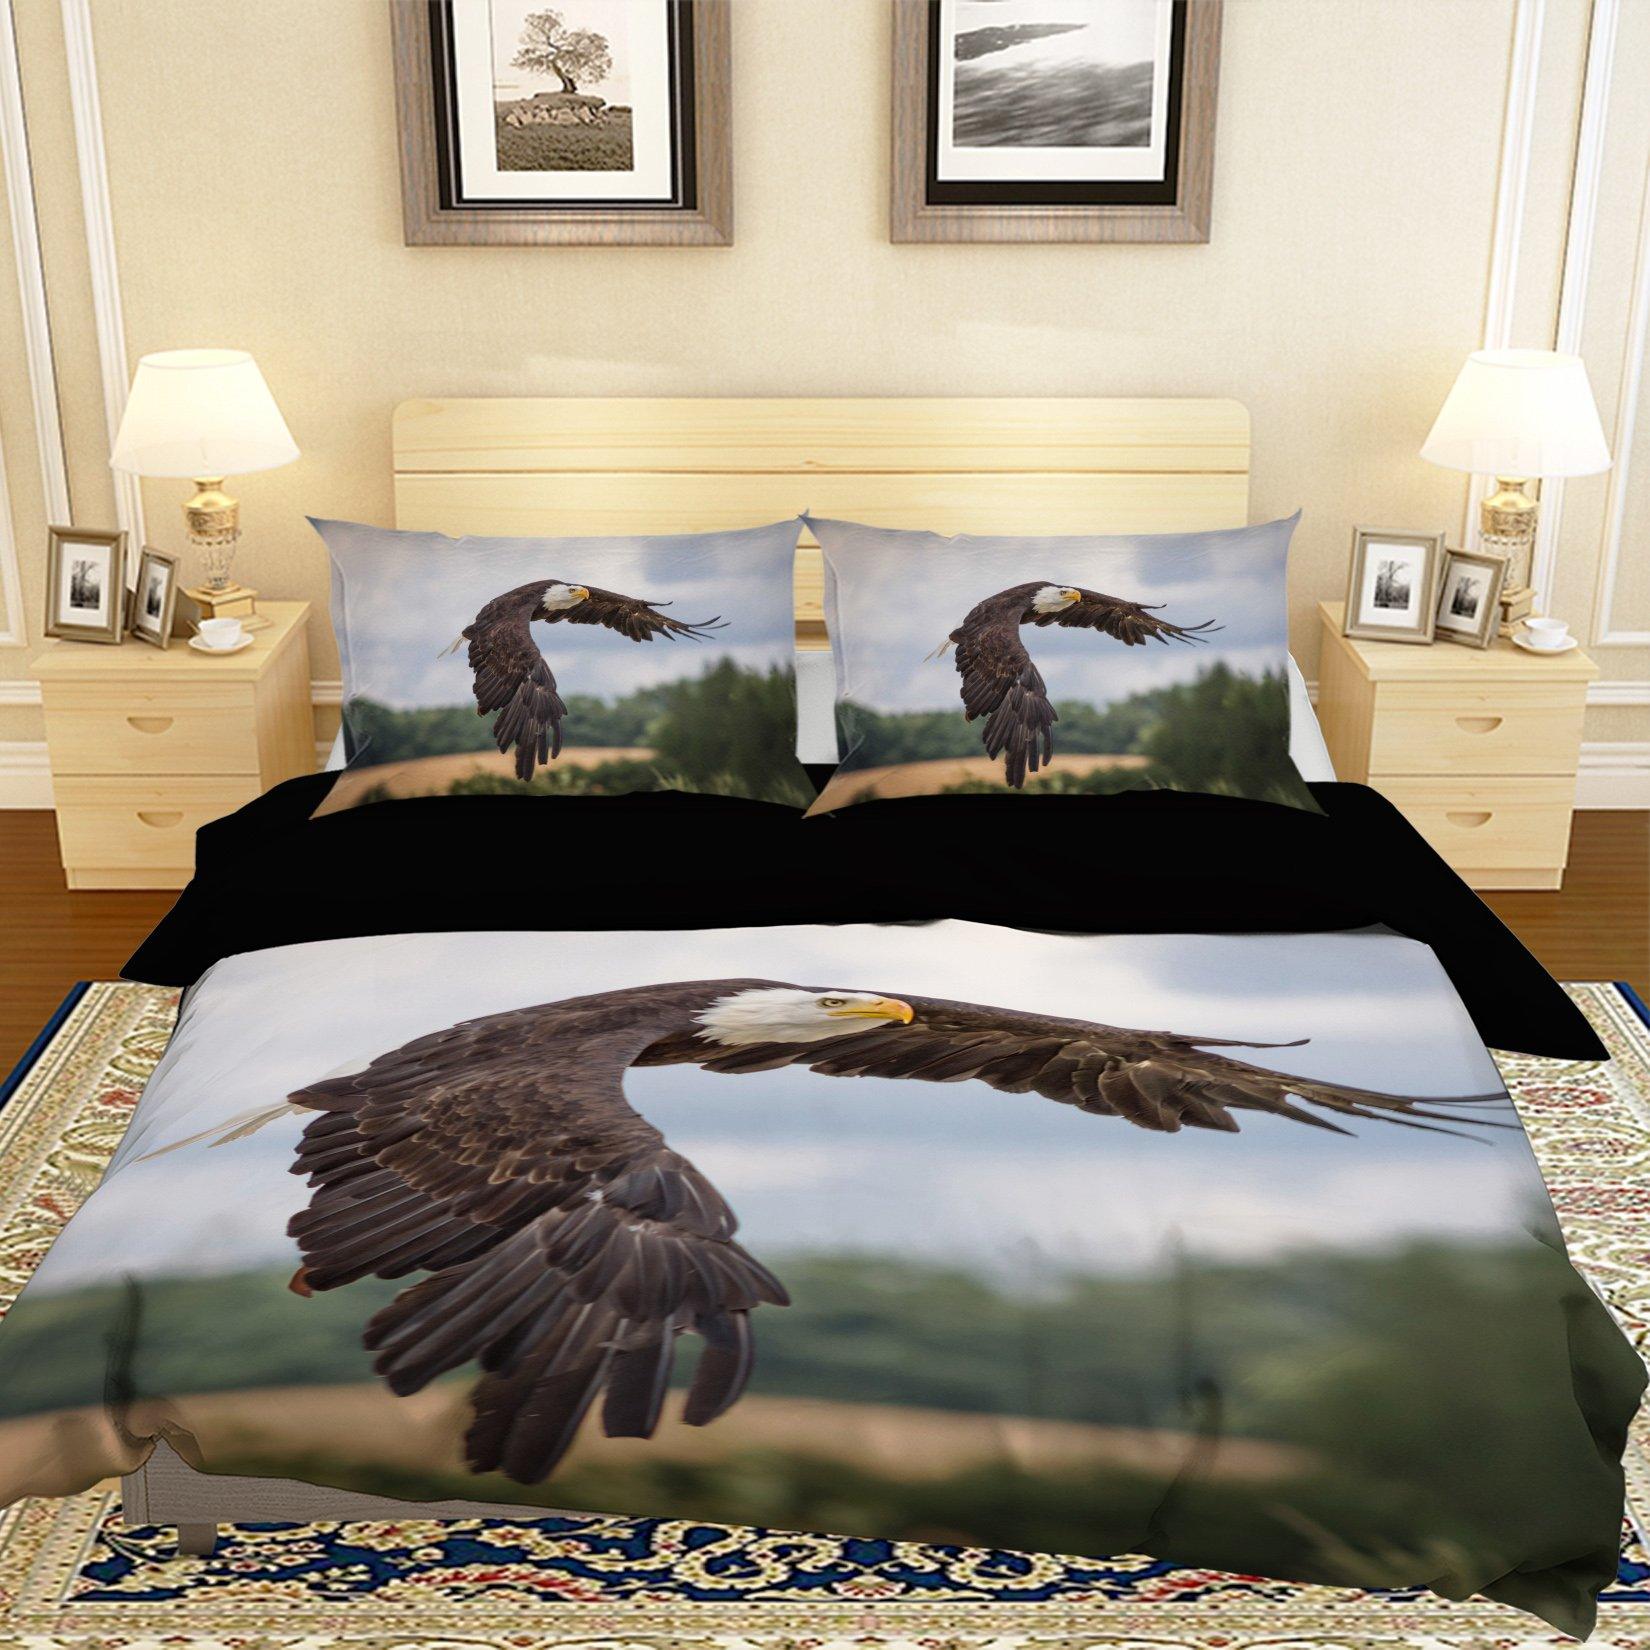 3D Eagle Spreading Wings 1910 Bed Pillowcases Quilt Quiet Covers AJ Creativity Home 